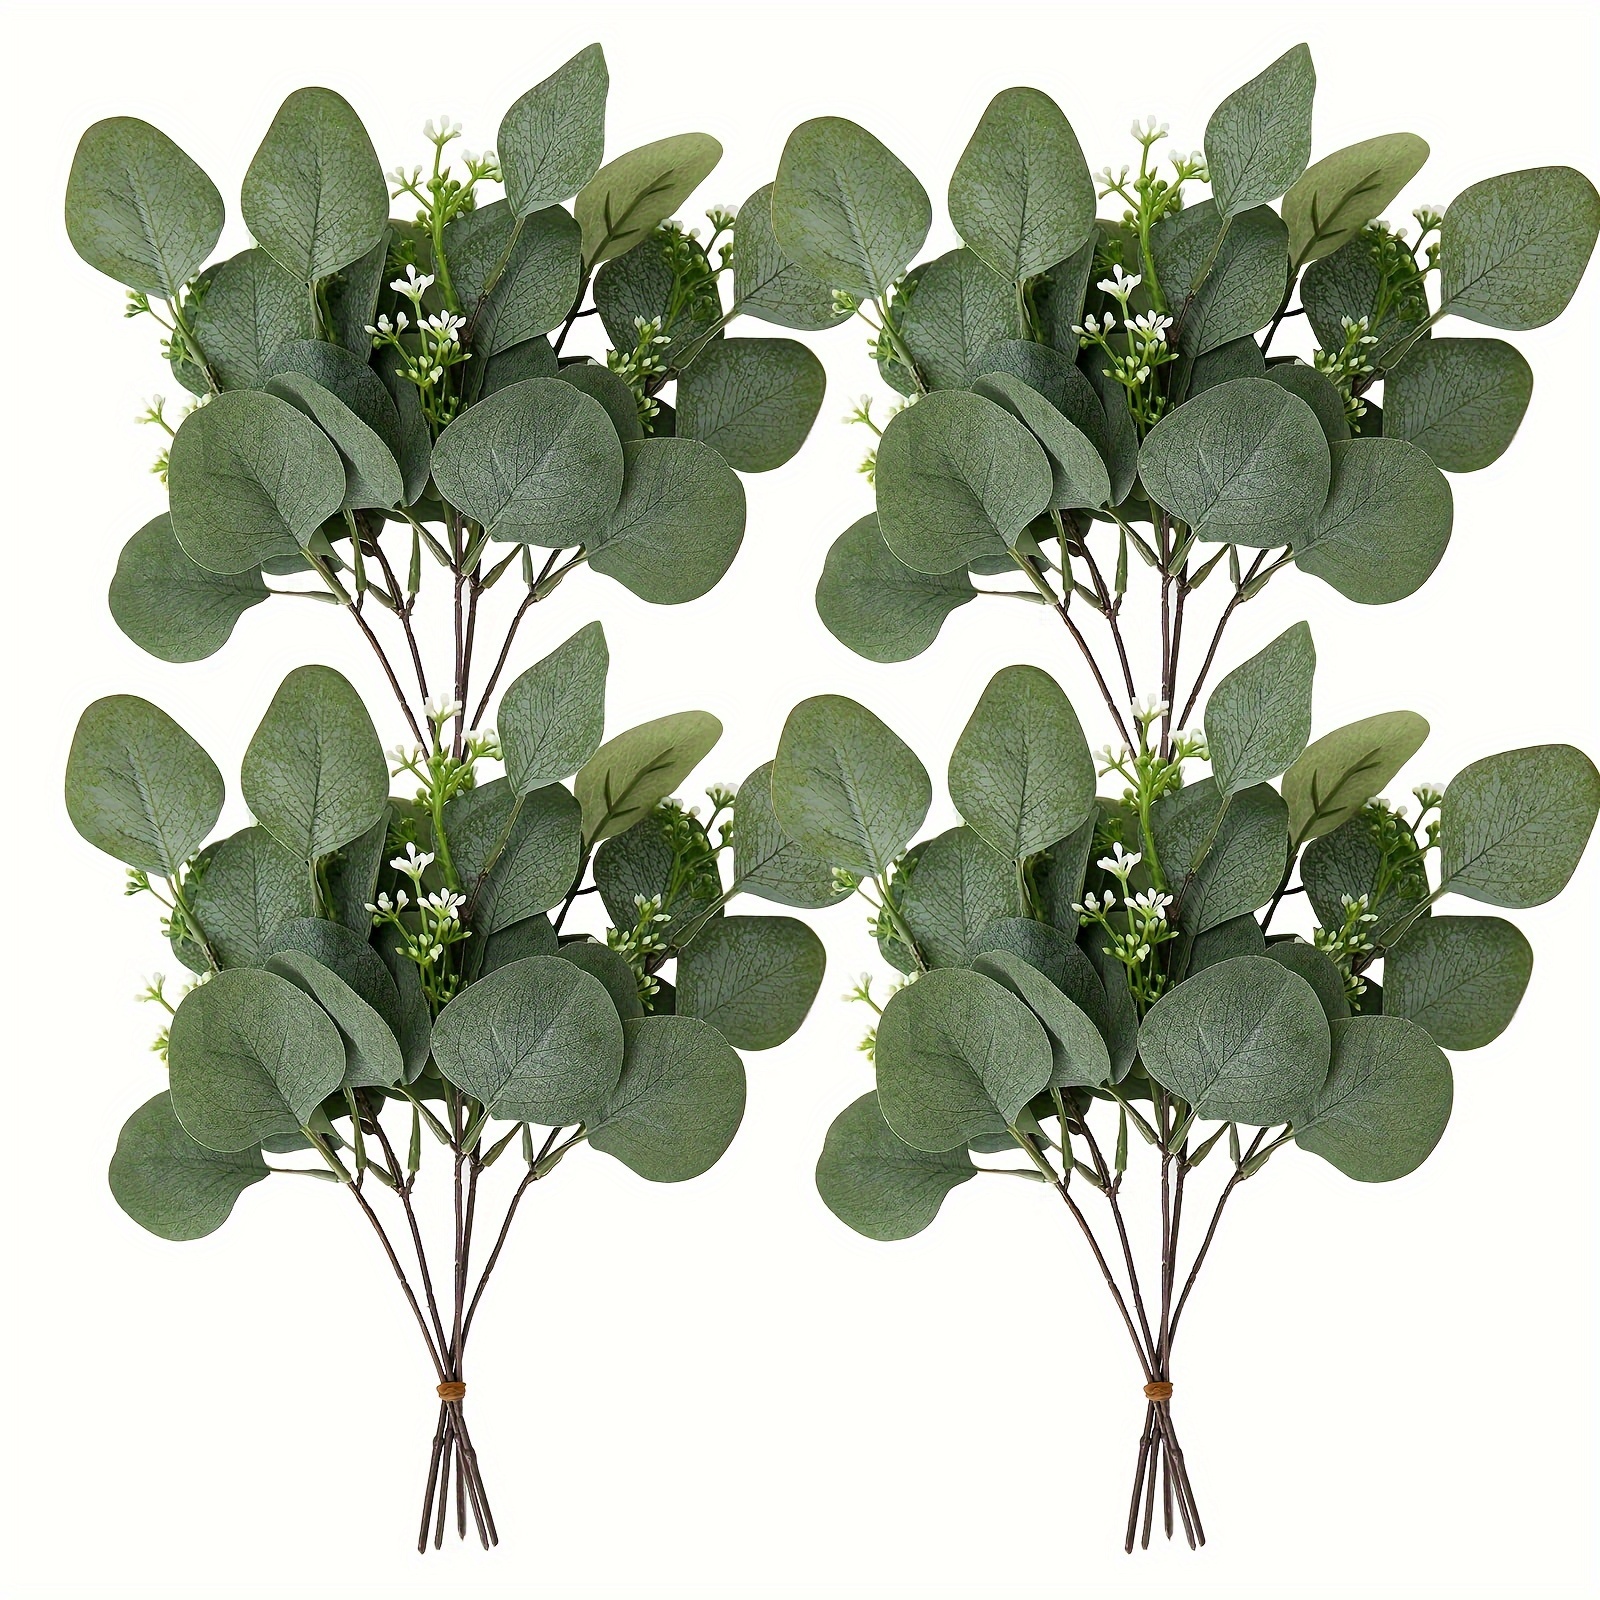 

10/20pcs Artificial Eucalyptus Leaves Branch, Fake Green Plant Branches Used For Spring Summer Home Table Decor, Bride's Wedding Bouquets, Table Centerpieces, Diy Decorative Flowers